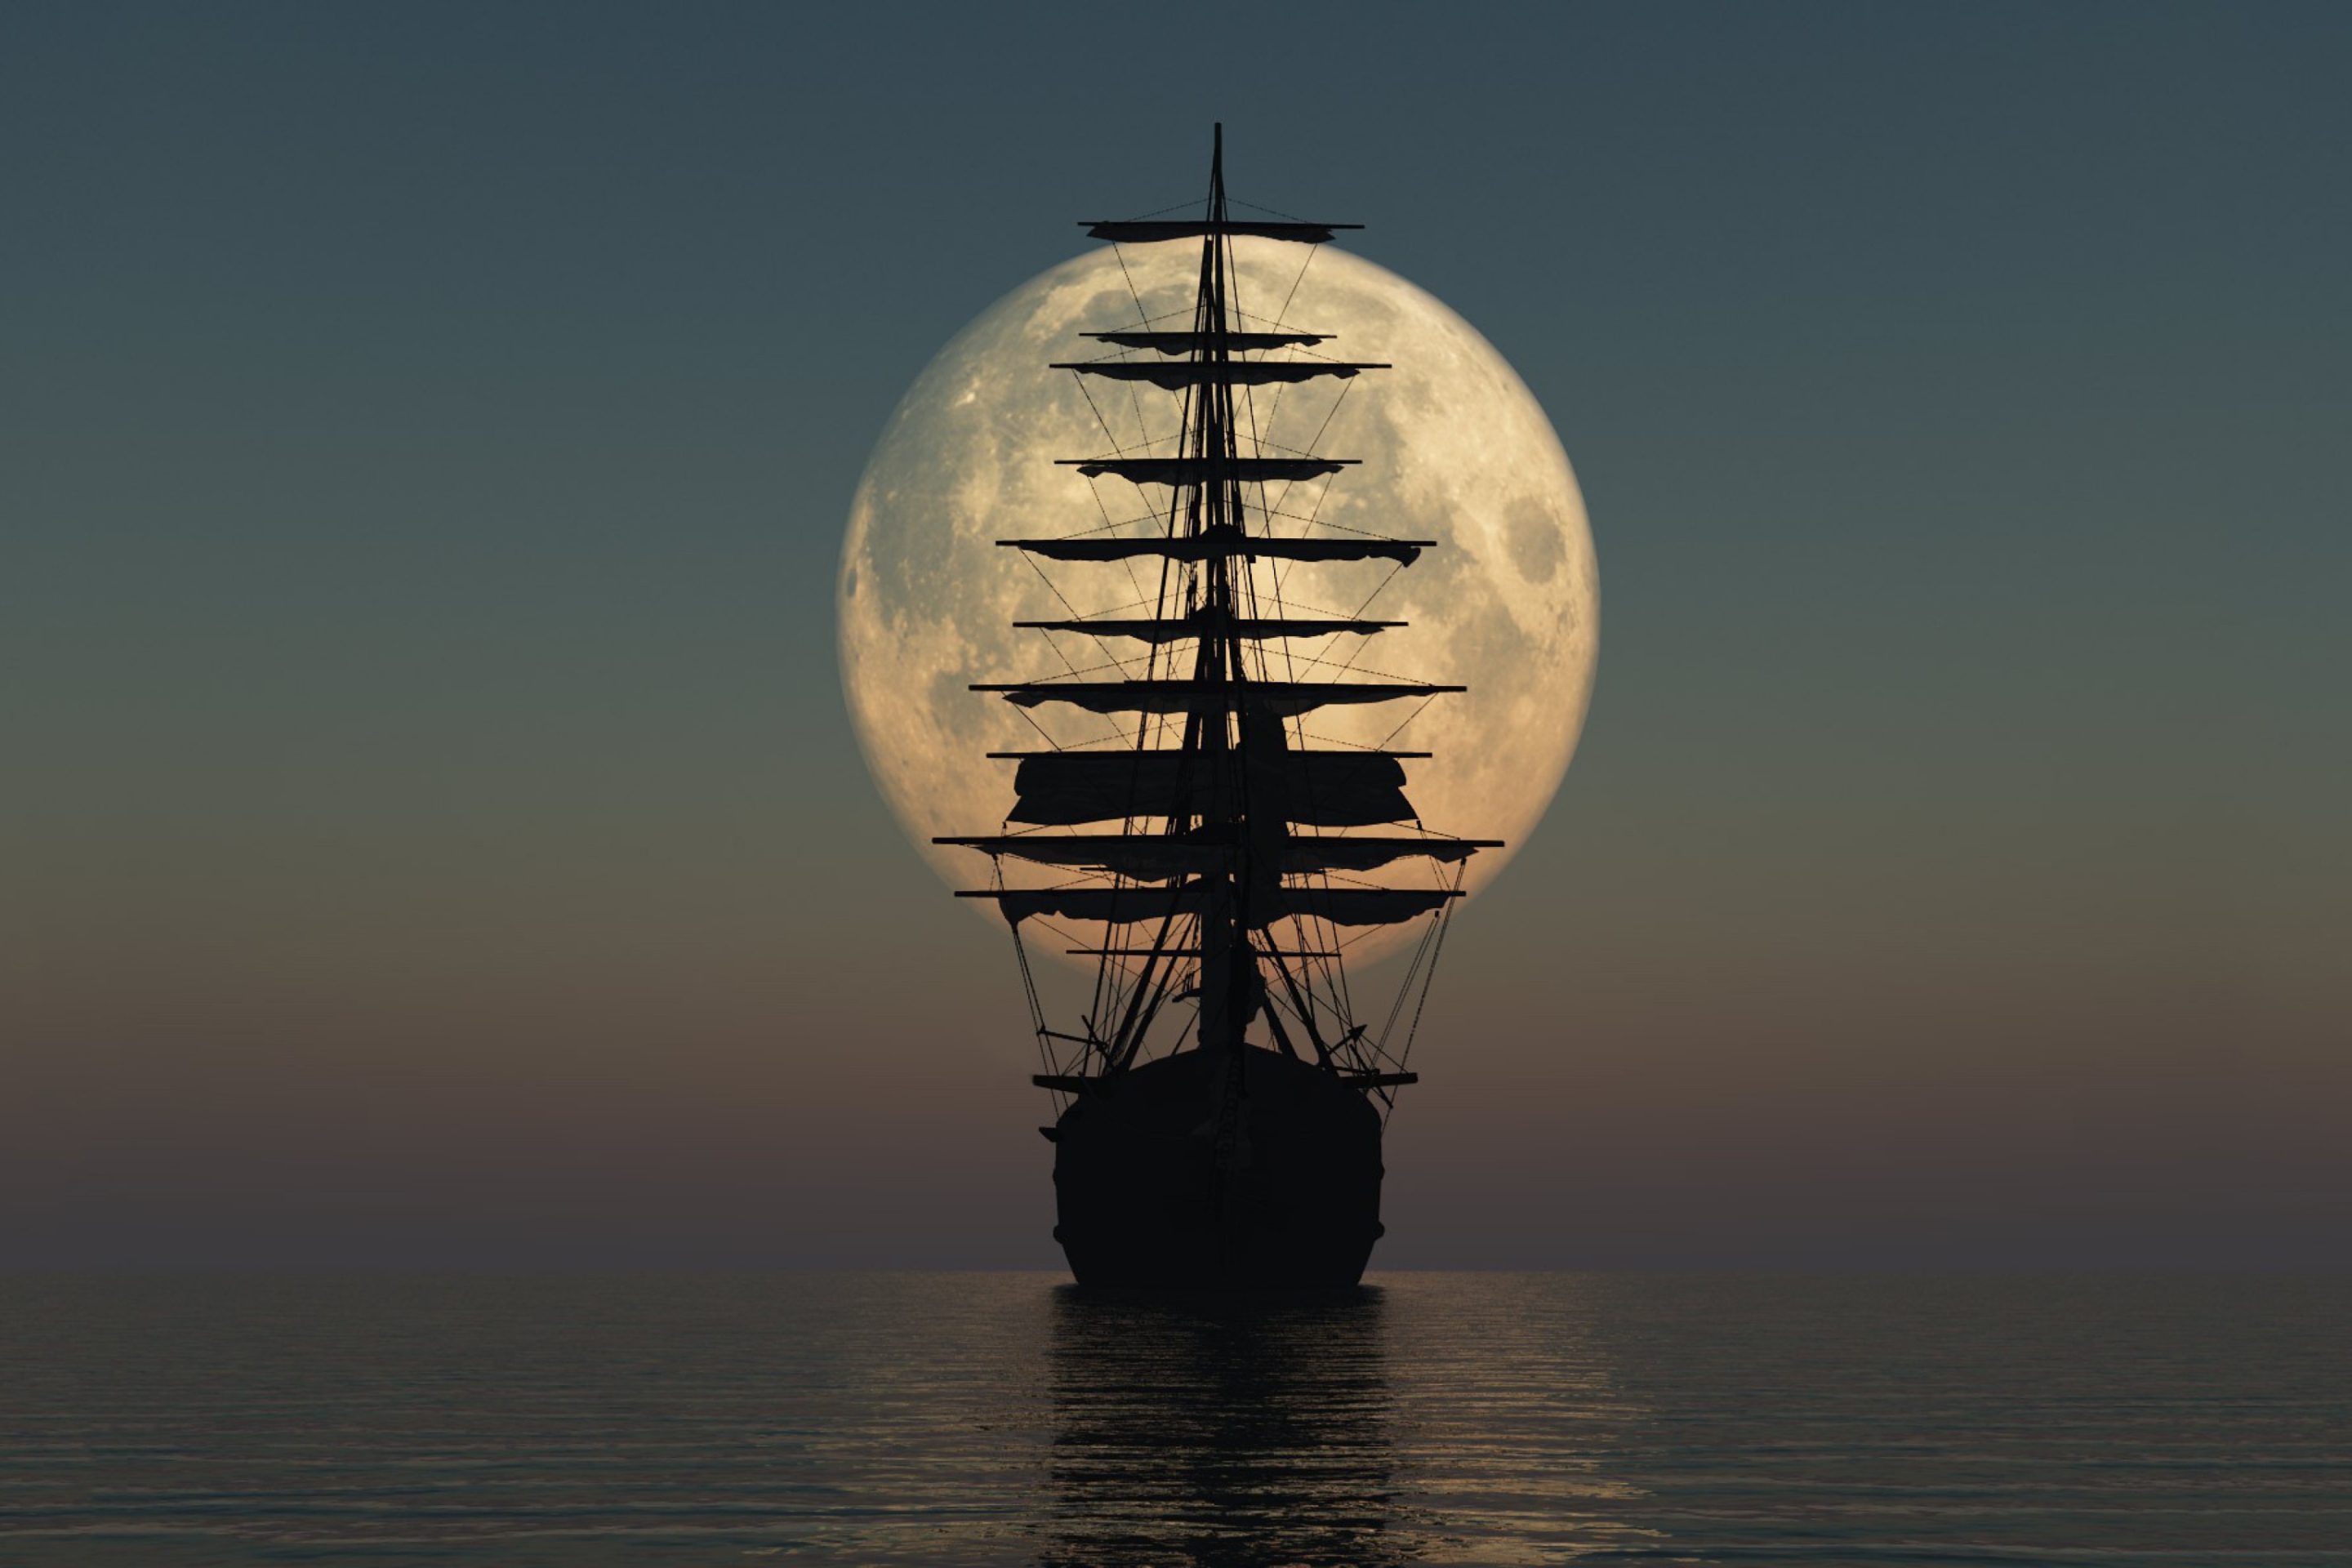 Ship Silhouette In Front Of Full Moon wallpaper 2880x1920